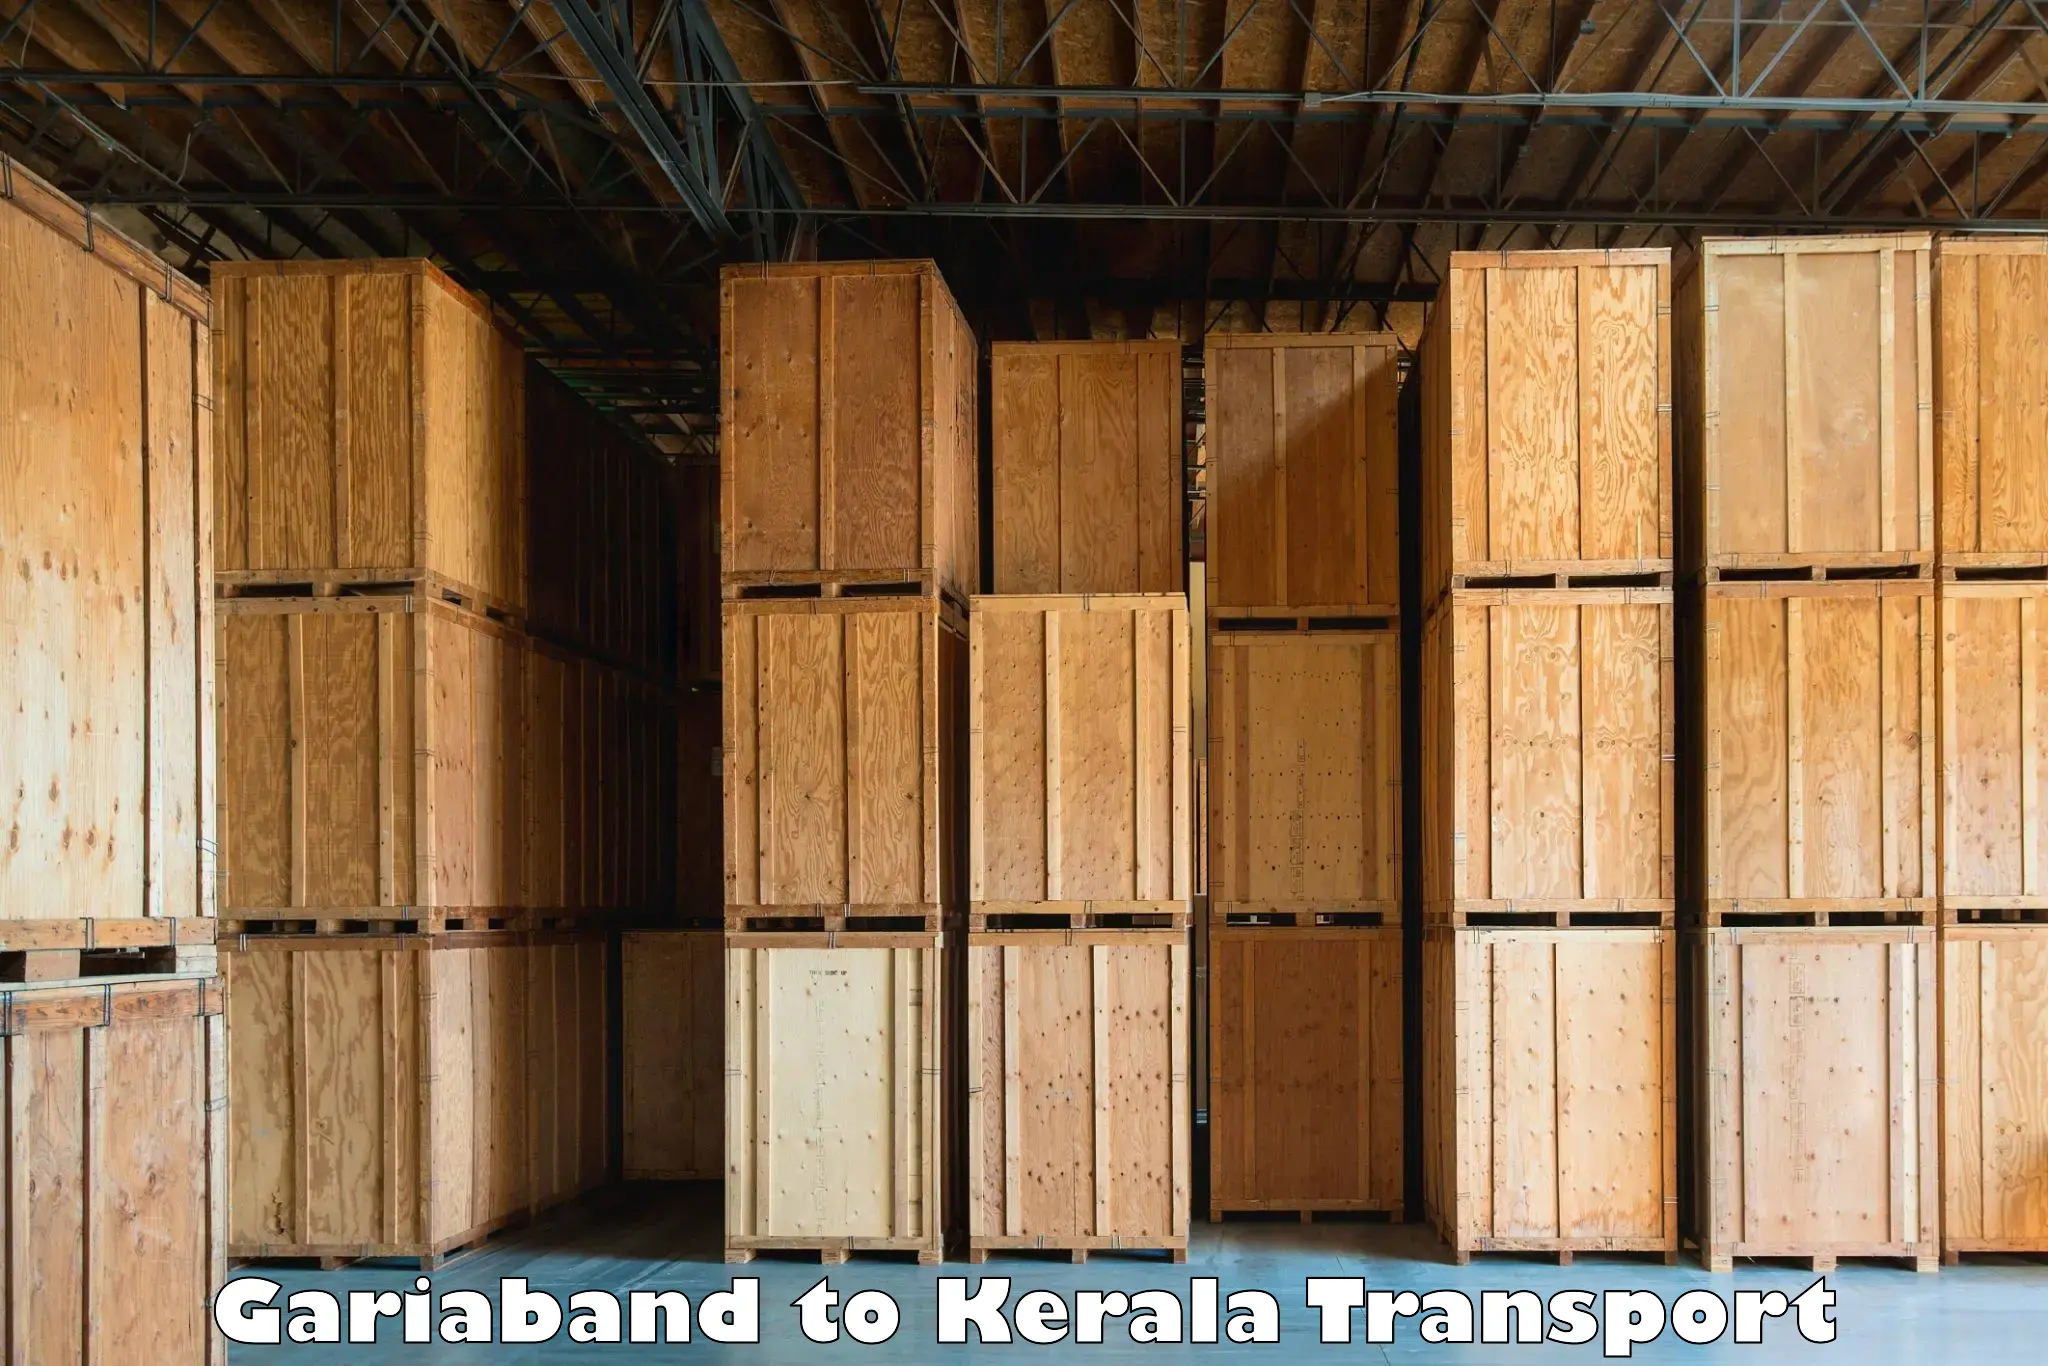 Air cargo transport services Gariaband to Kerala